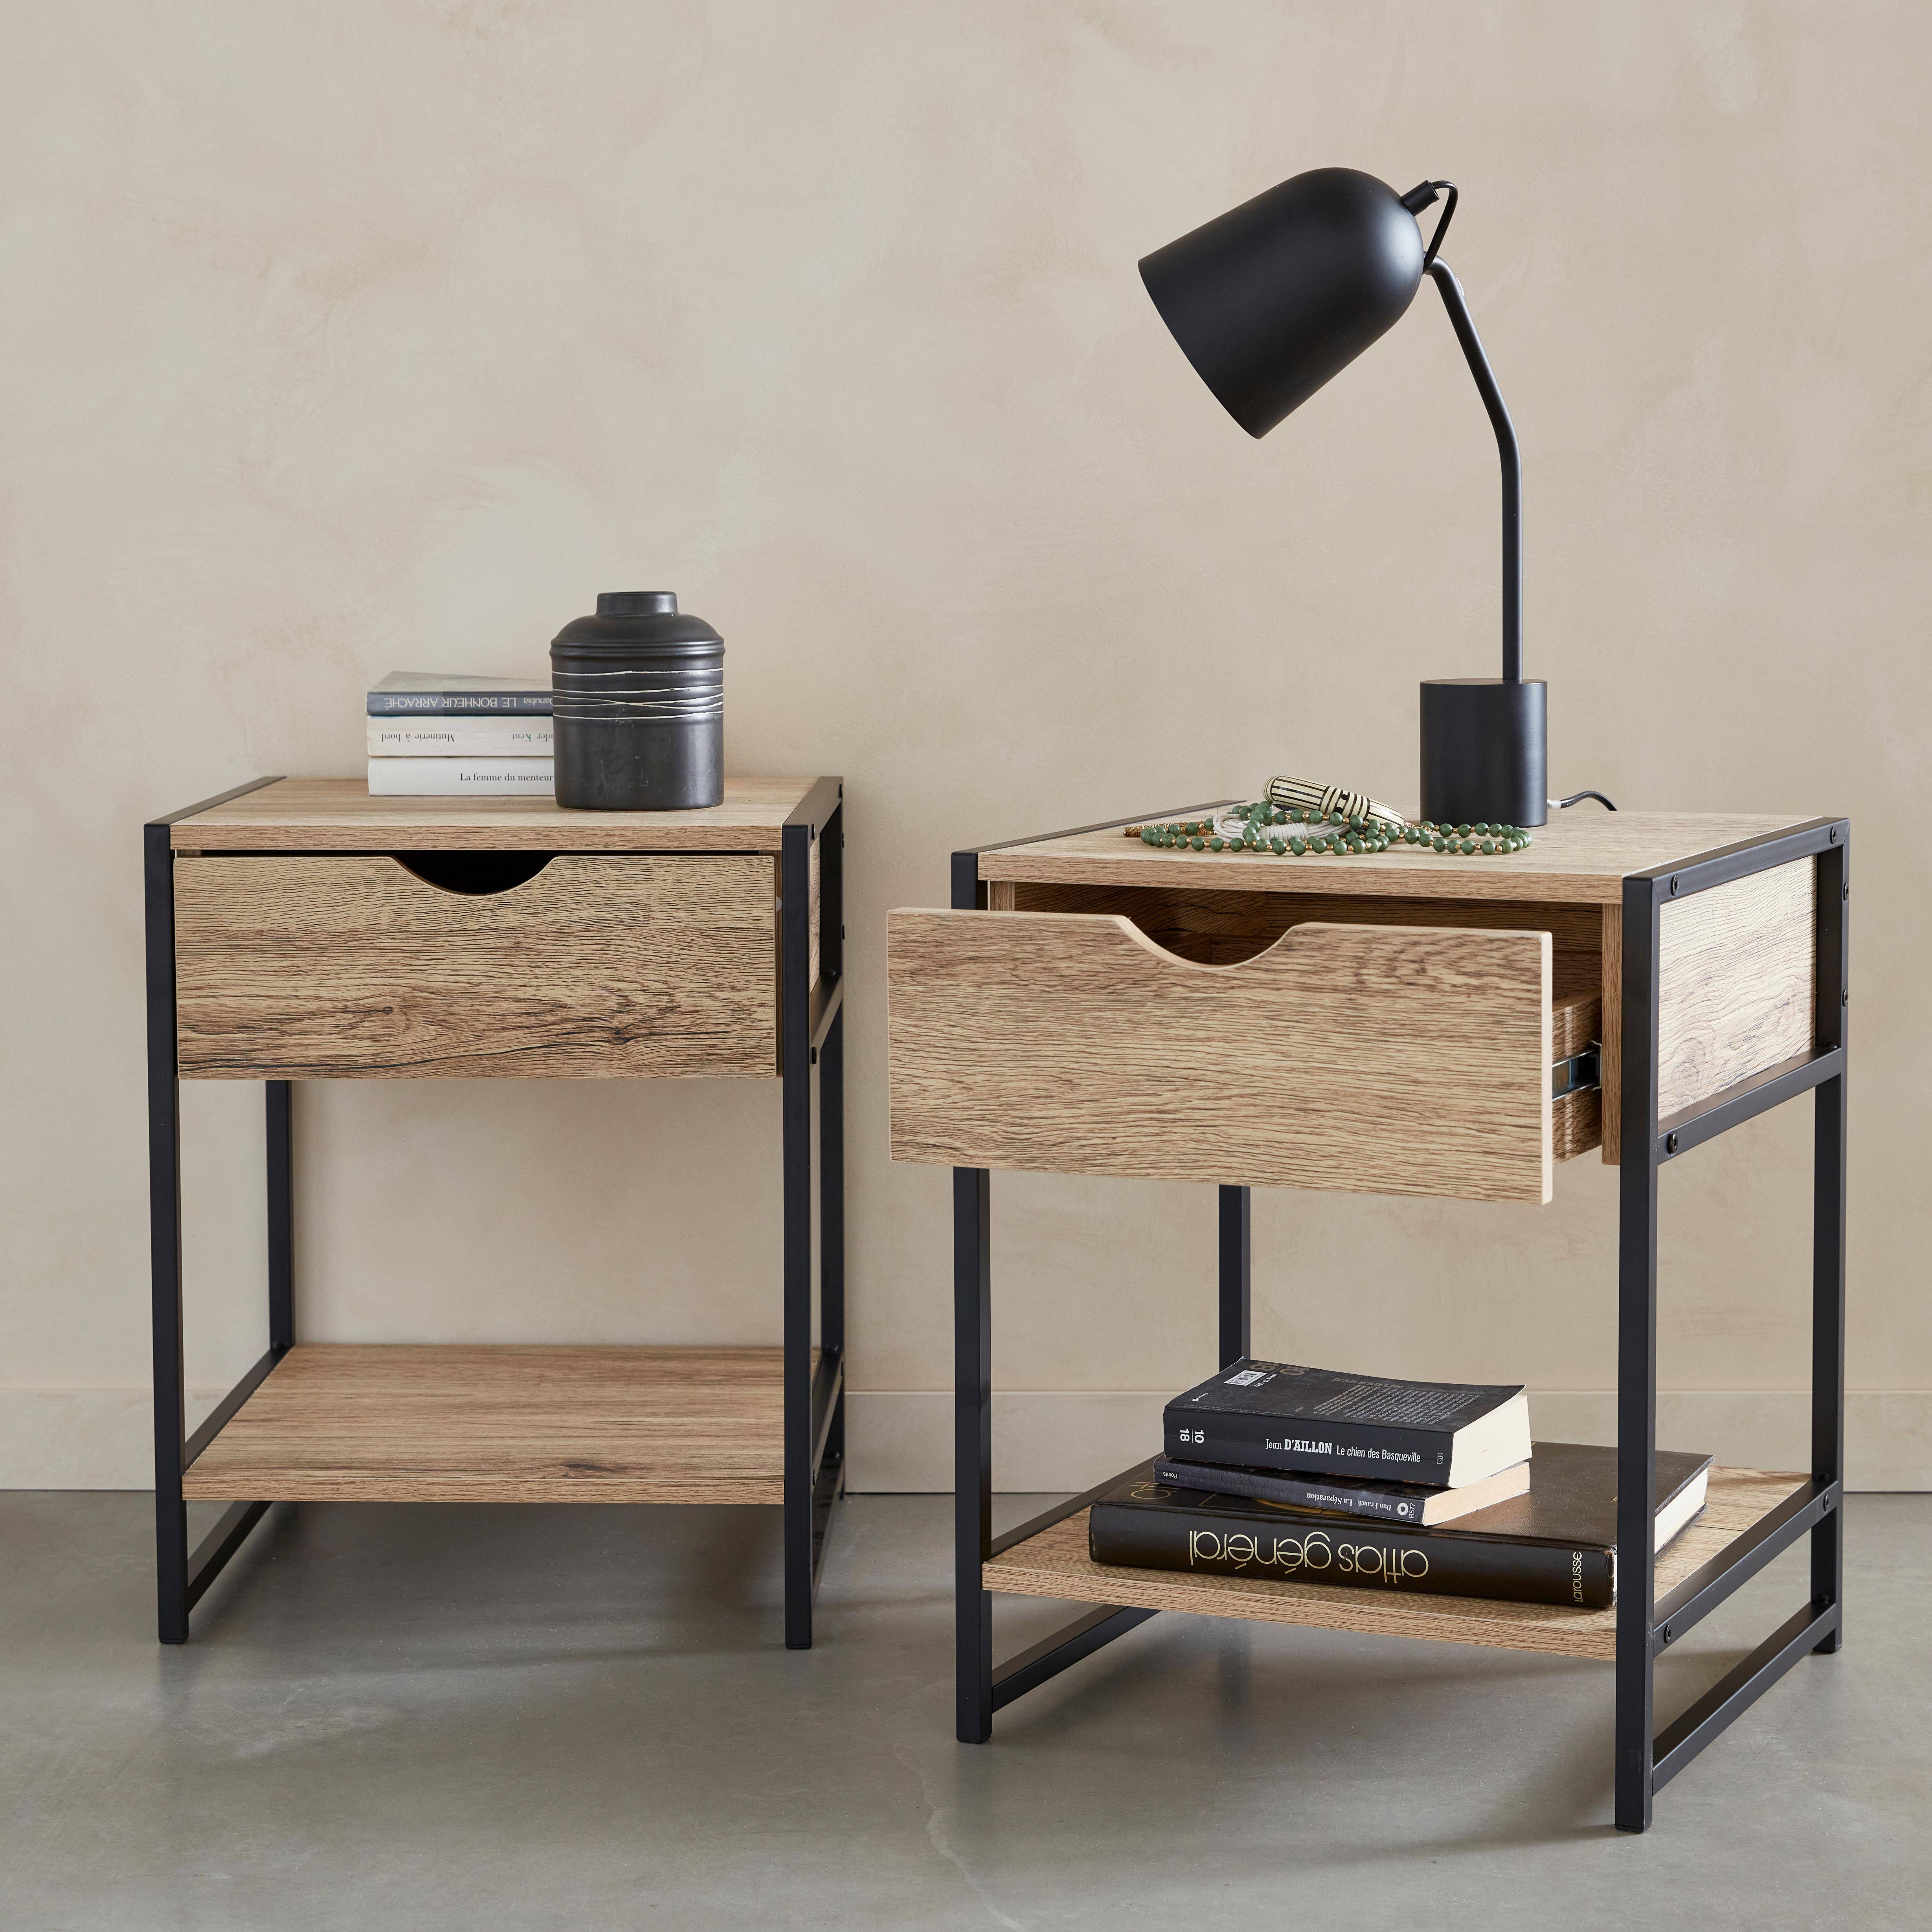 Pair of metal and wood-effect bedside tables with drawer and shelf, 40x40x50cm - Loft,sweeek,Photo2